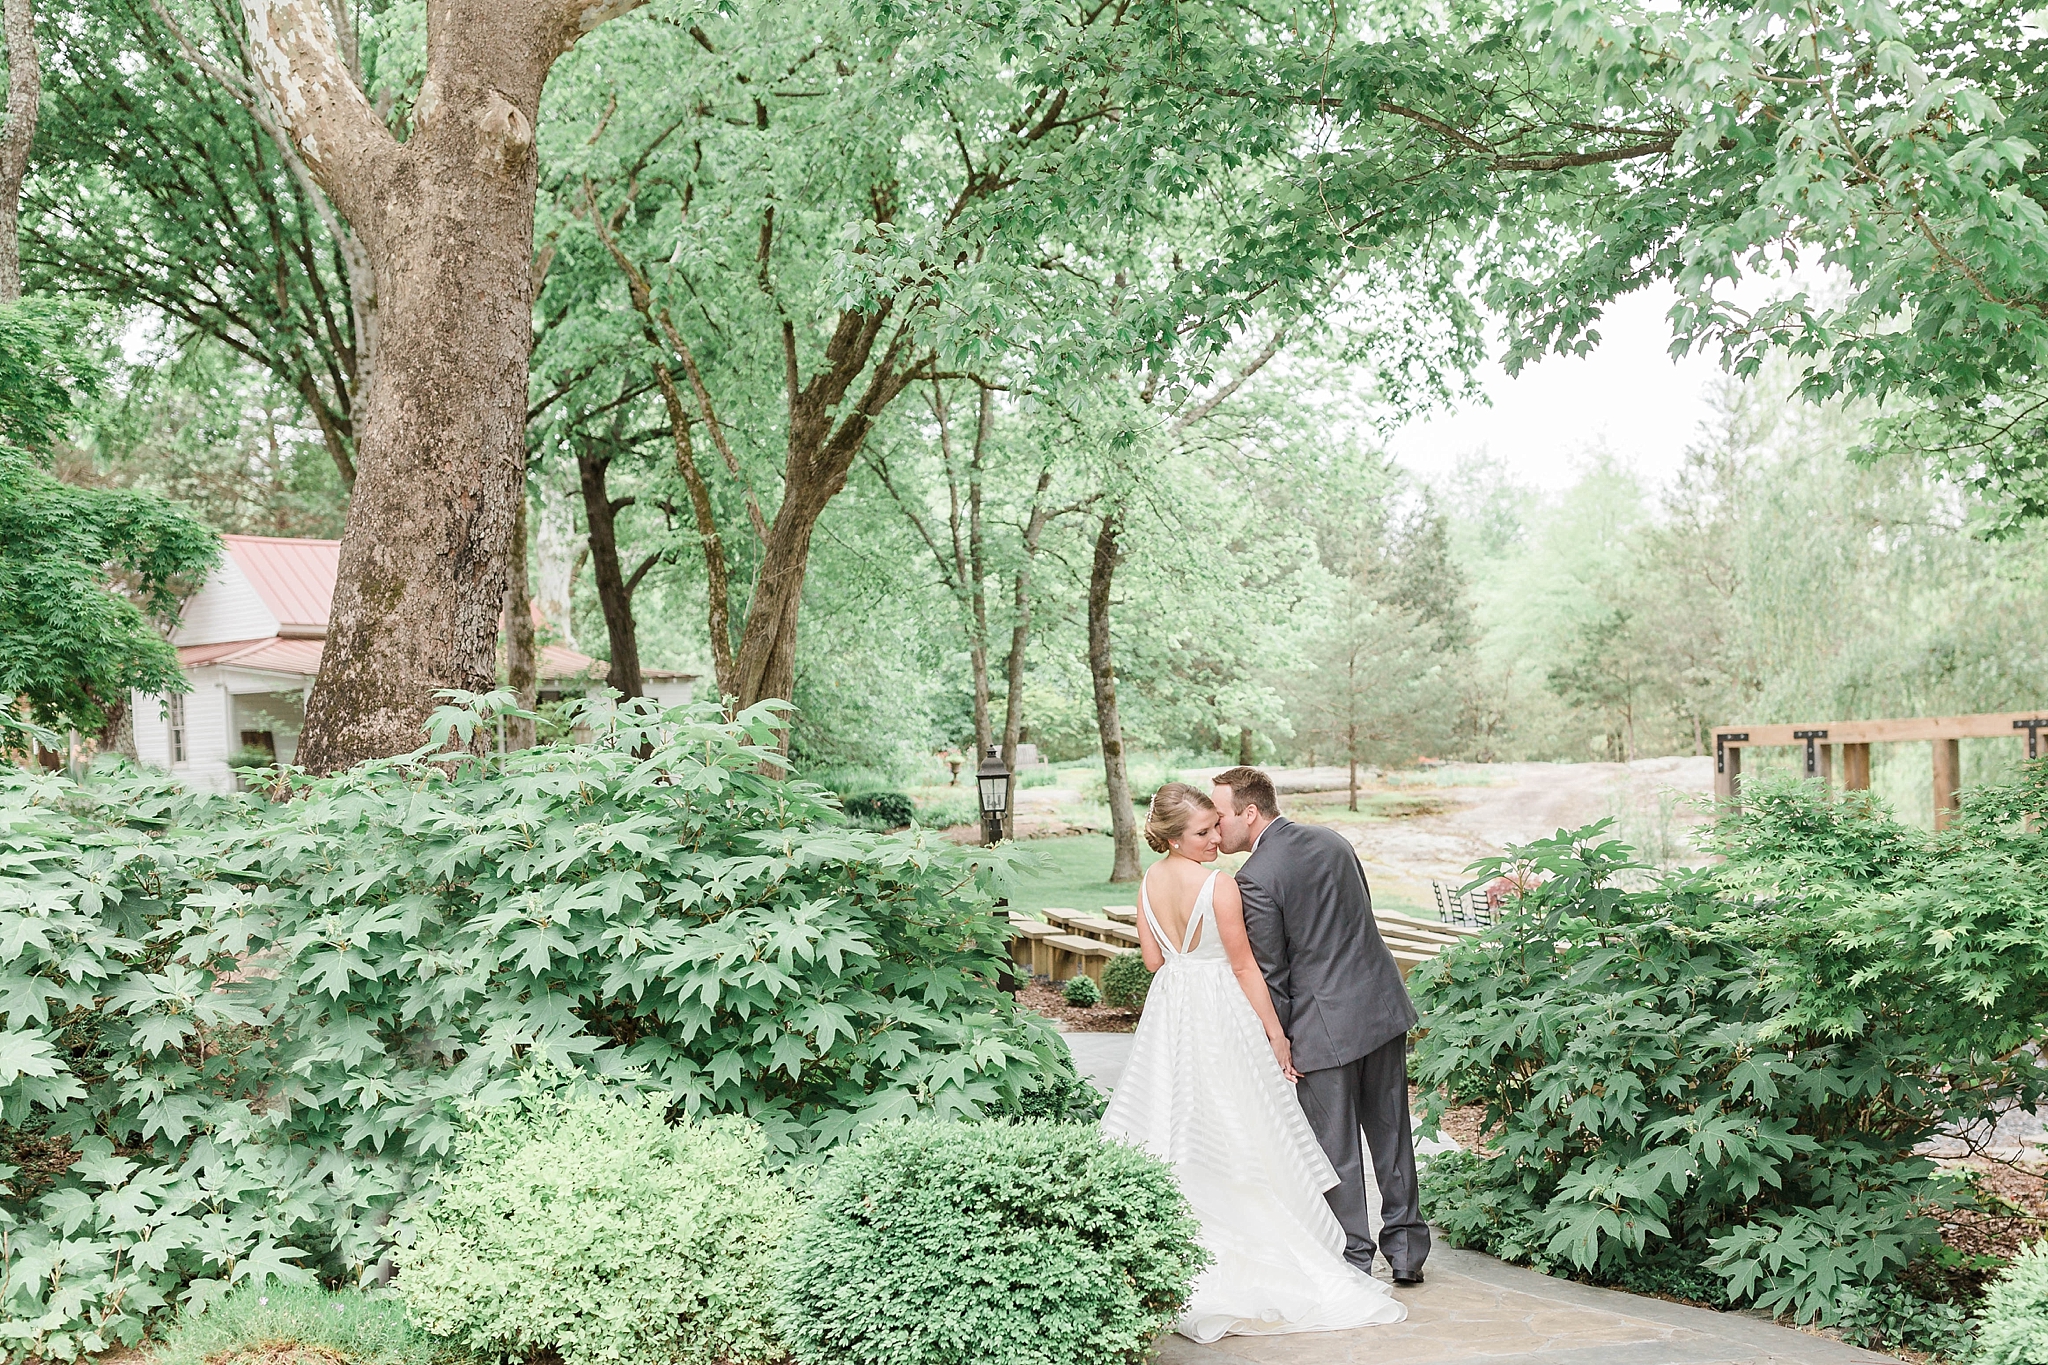 This stylish Mill at Fine Creek wedding in Powhatan, VA features a soft and romantic color palette of blush, gold, and ivory.